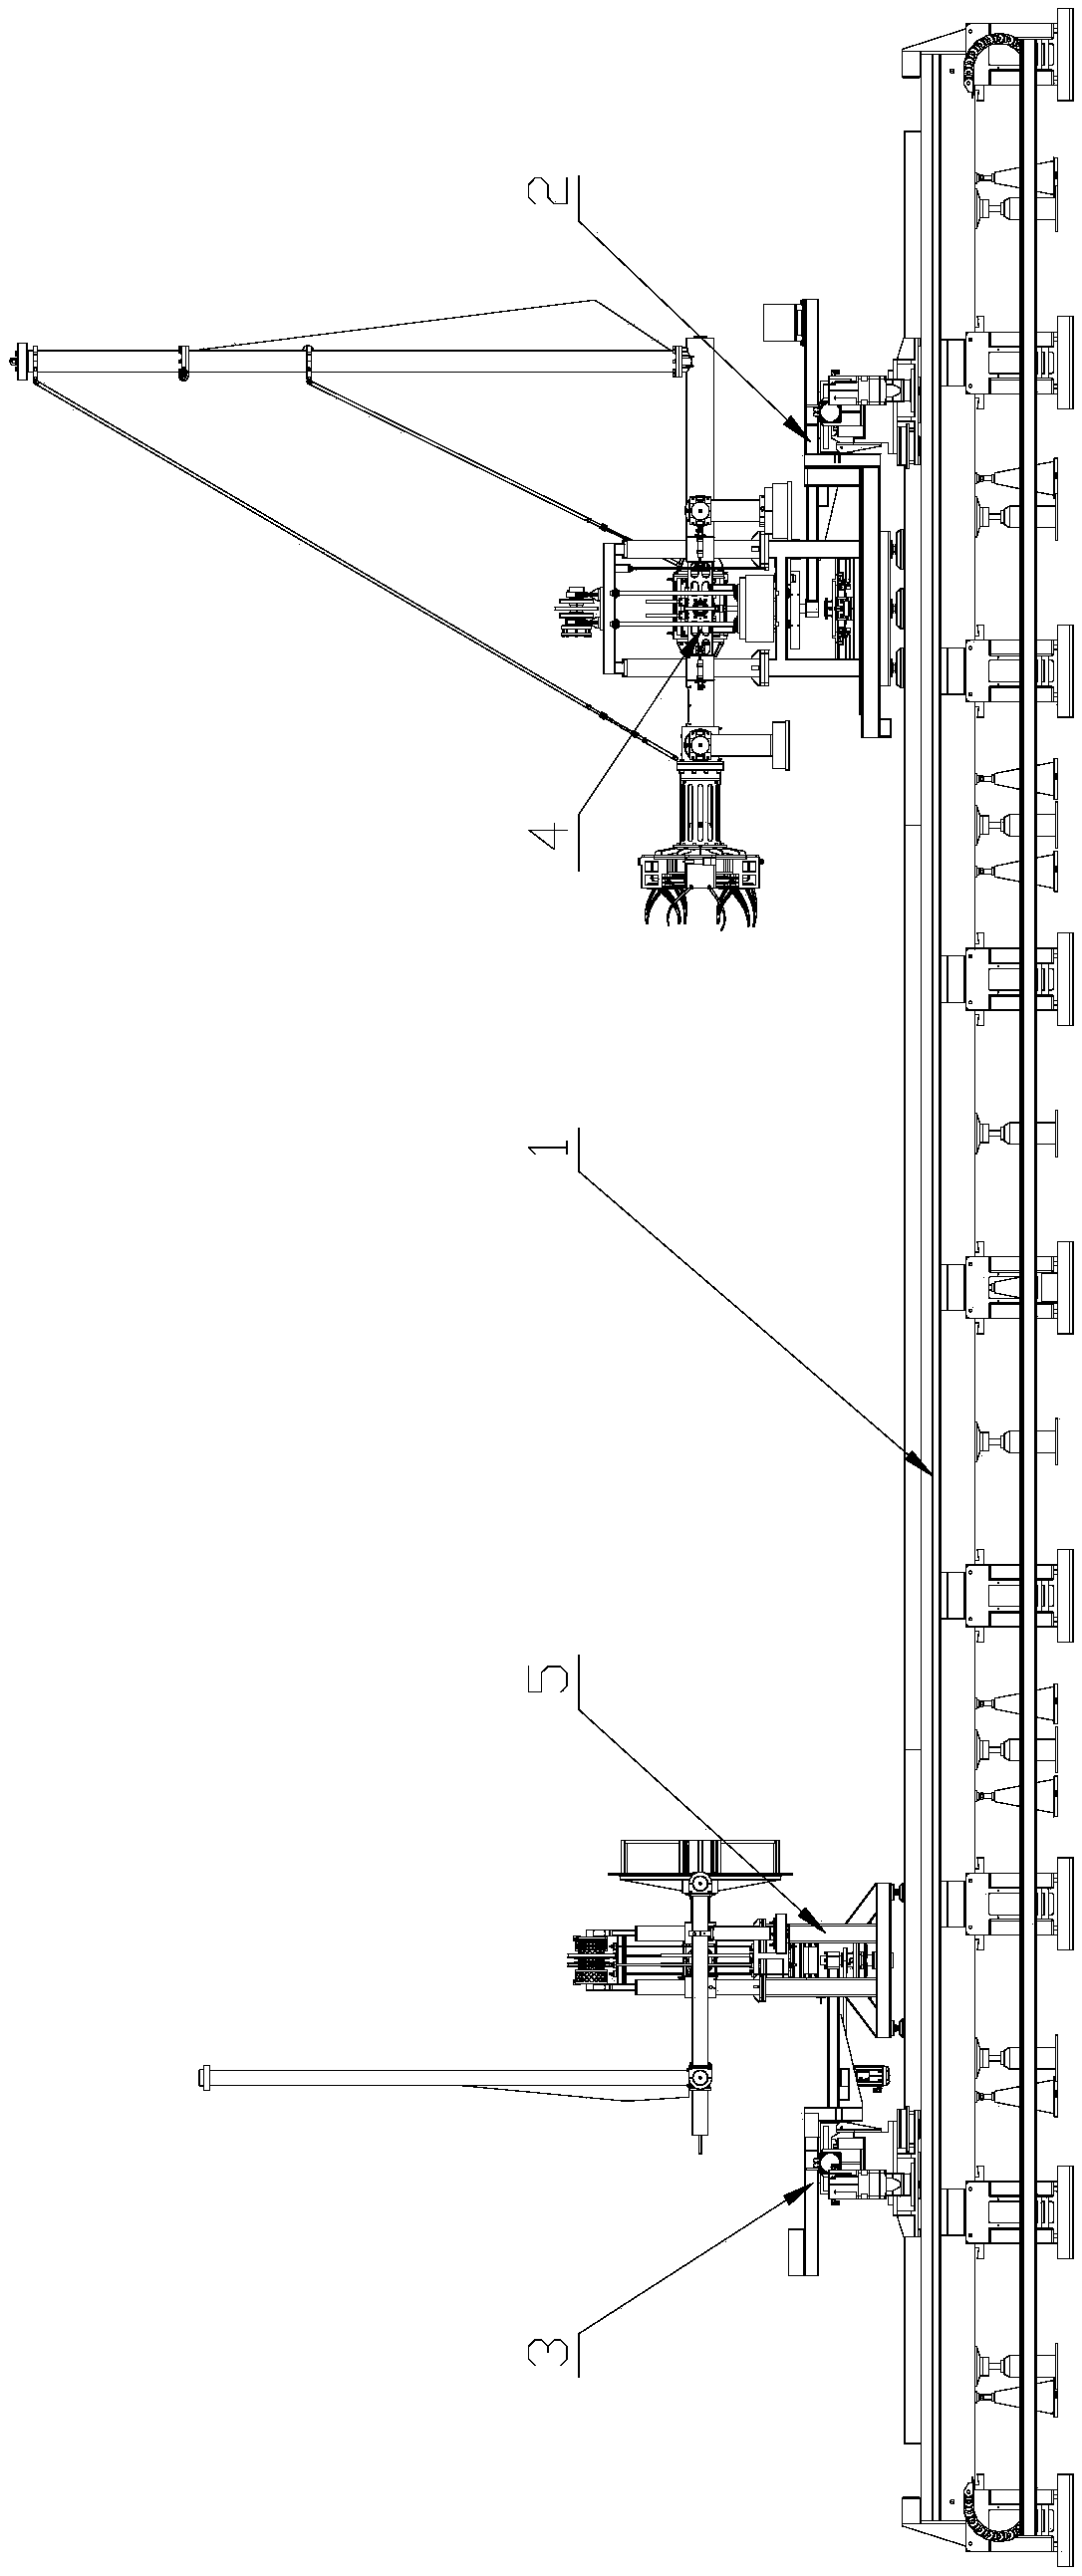 Twelve-degree-of-freedom space simulator butt-joint performance testing device